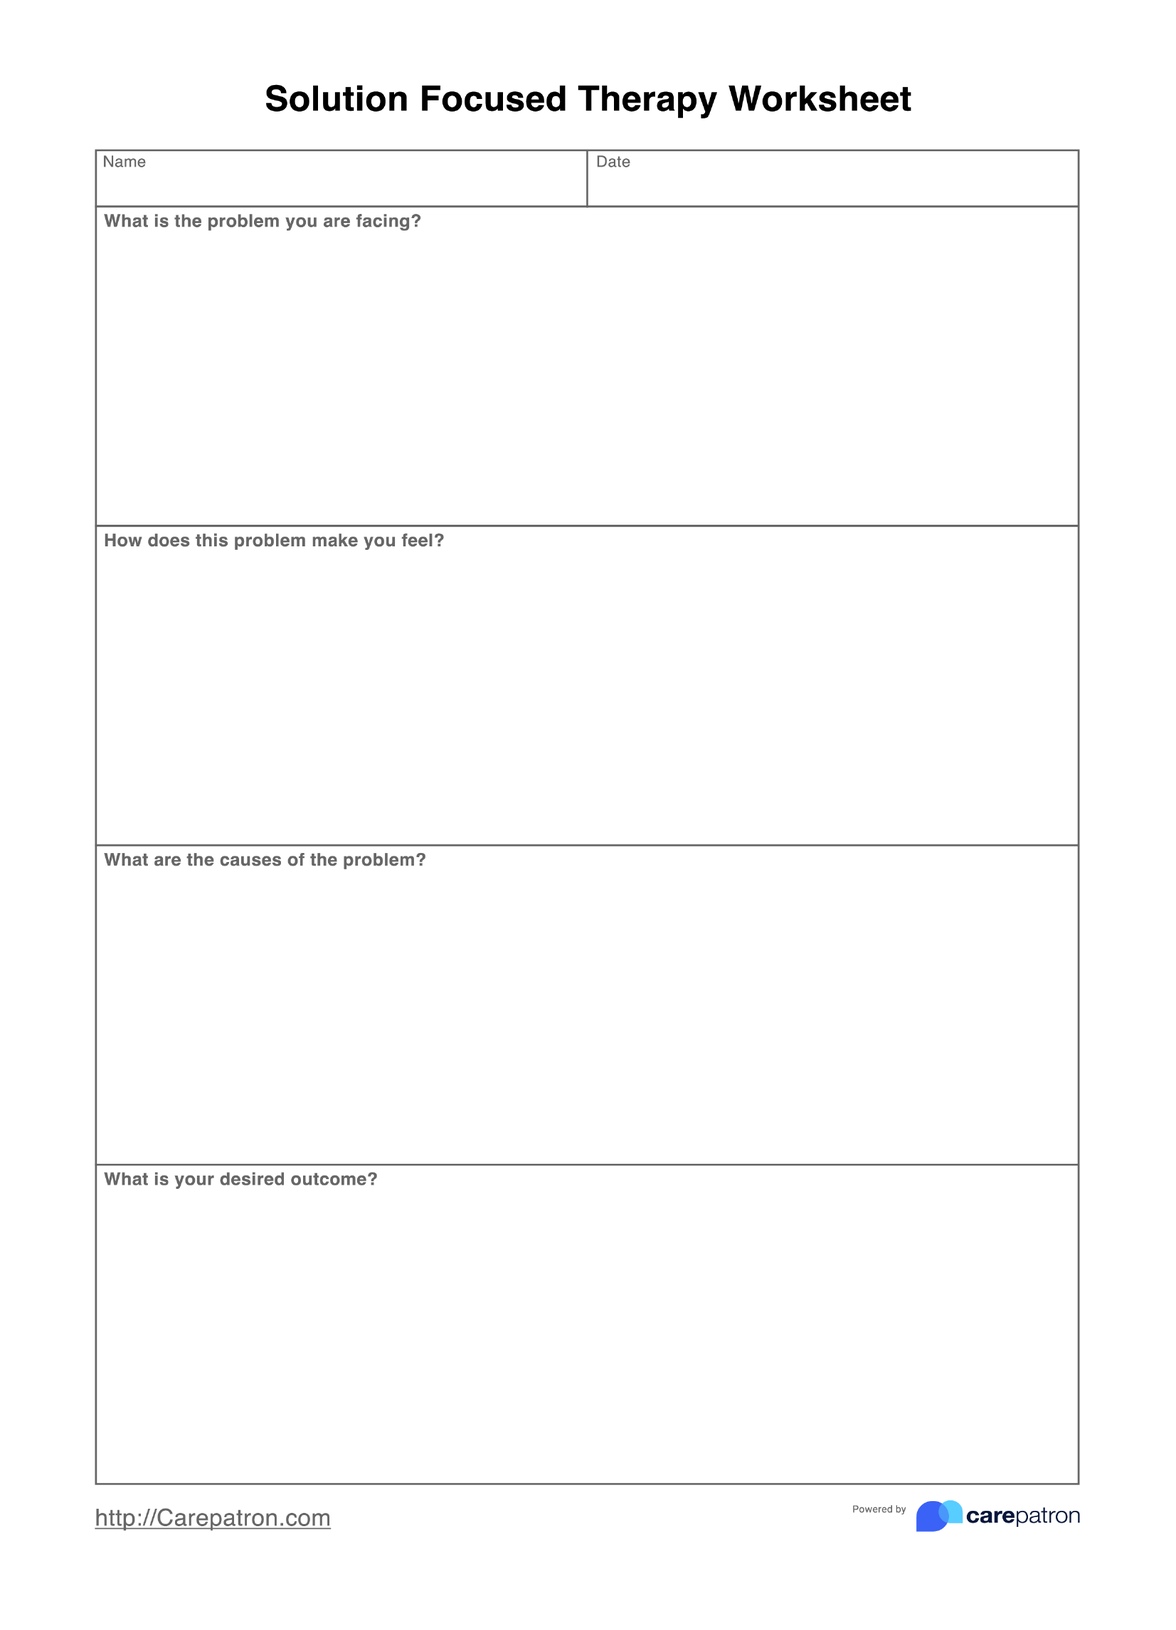 Solution Focused Therapy Worksheets PDF Example